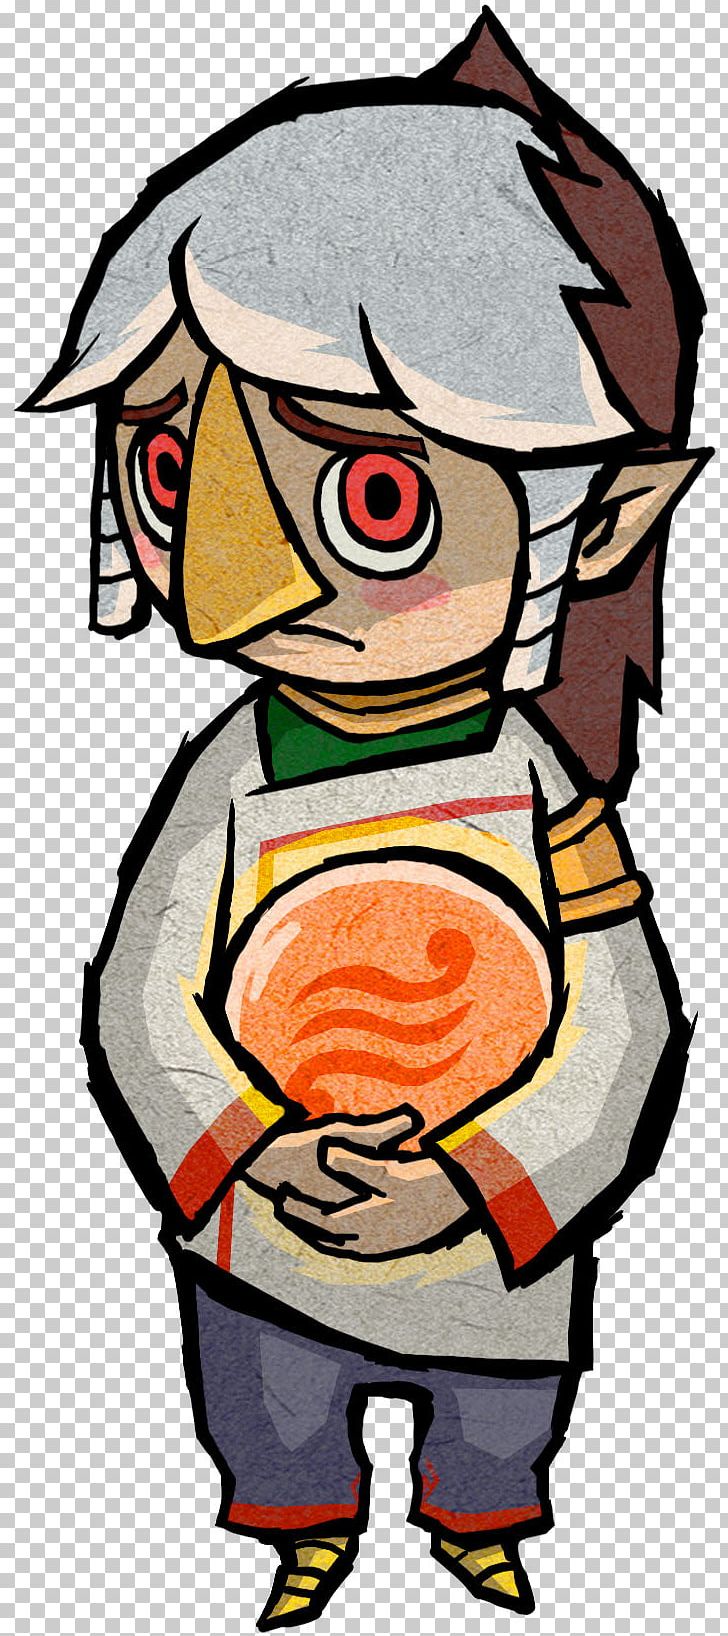 The Legend Of Zelda: The Wind Waker The Legend Of Zelda: Breath Of The Wild Link The Legend Of Zelda: Majora's Mask The Legend Of Zelda: Ocarina Of Time PNG, Clipart, Artwork, Beak, Fictional Character, Legend Of Zelda Ocarina Of Time, Legend Of Zelda The Wind Waker Free PNG Download